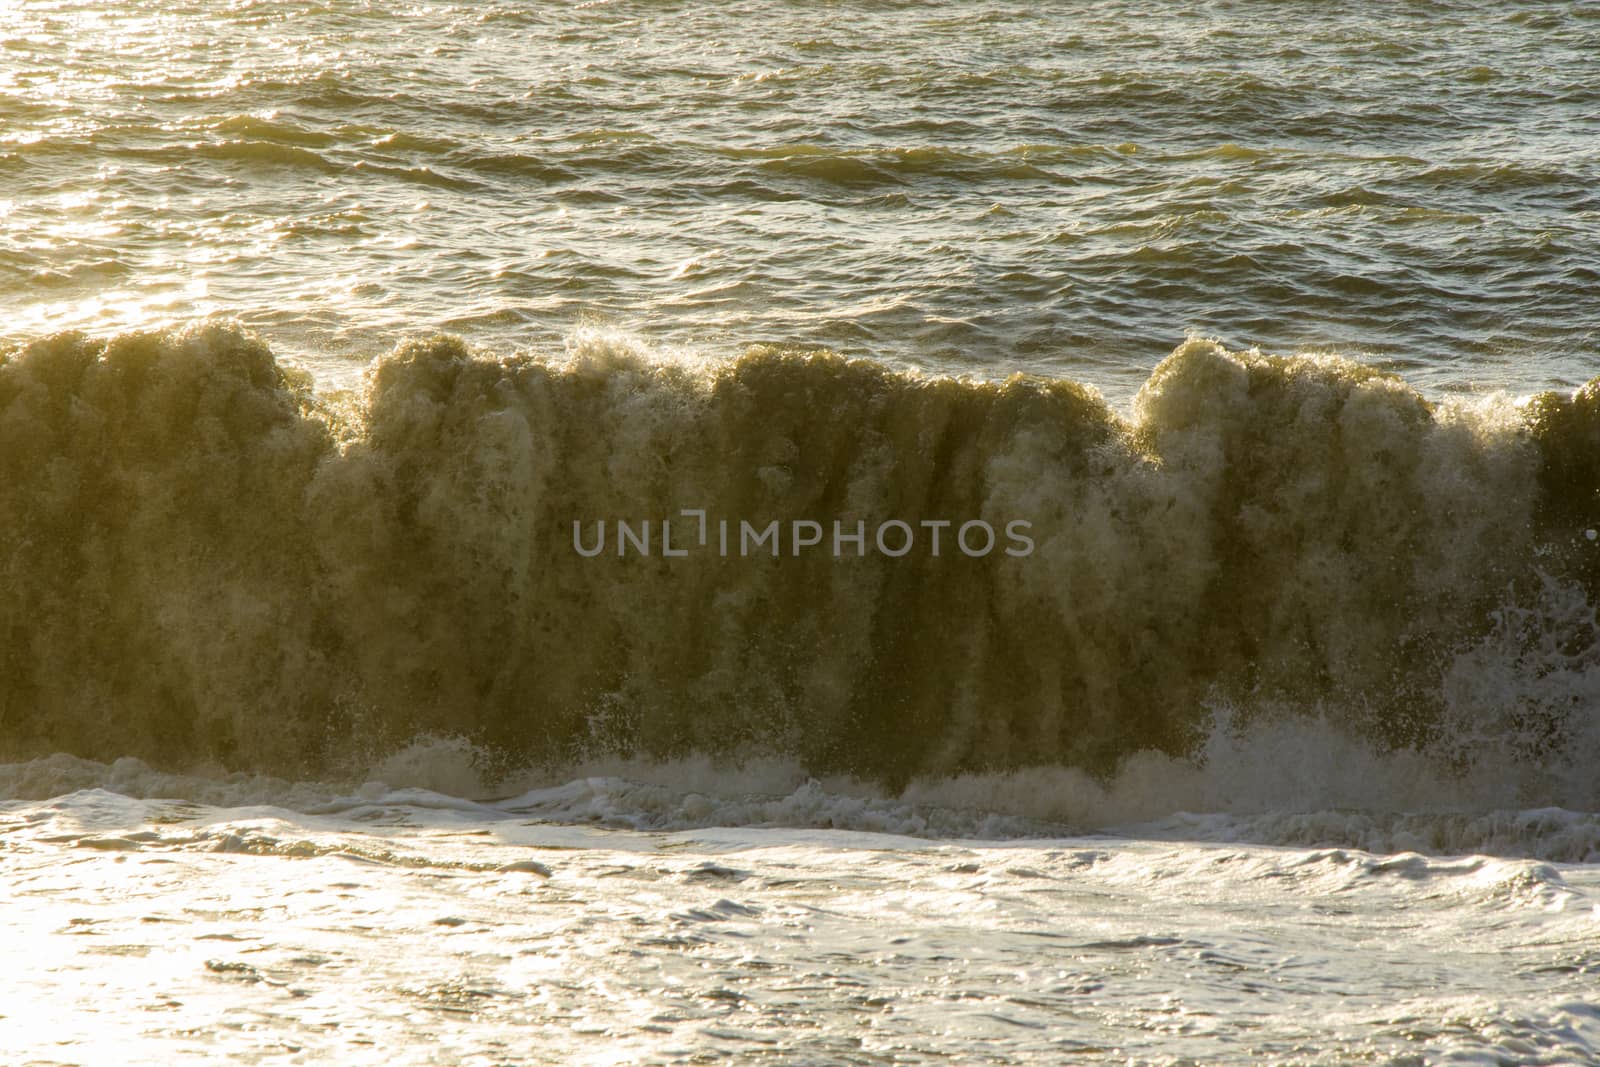 Sea and waves, stormy weather, waves and splashes in Batumi, Georgia. Stormy Black sea. Water background.